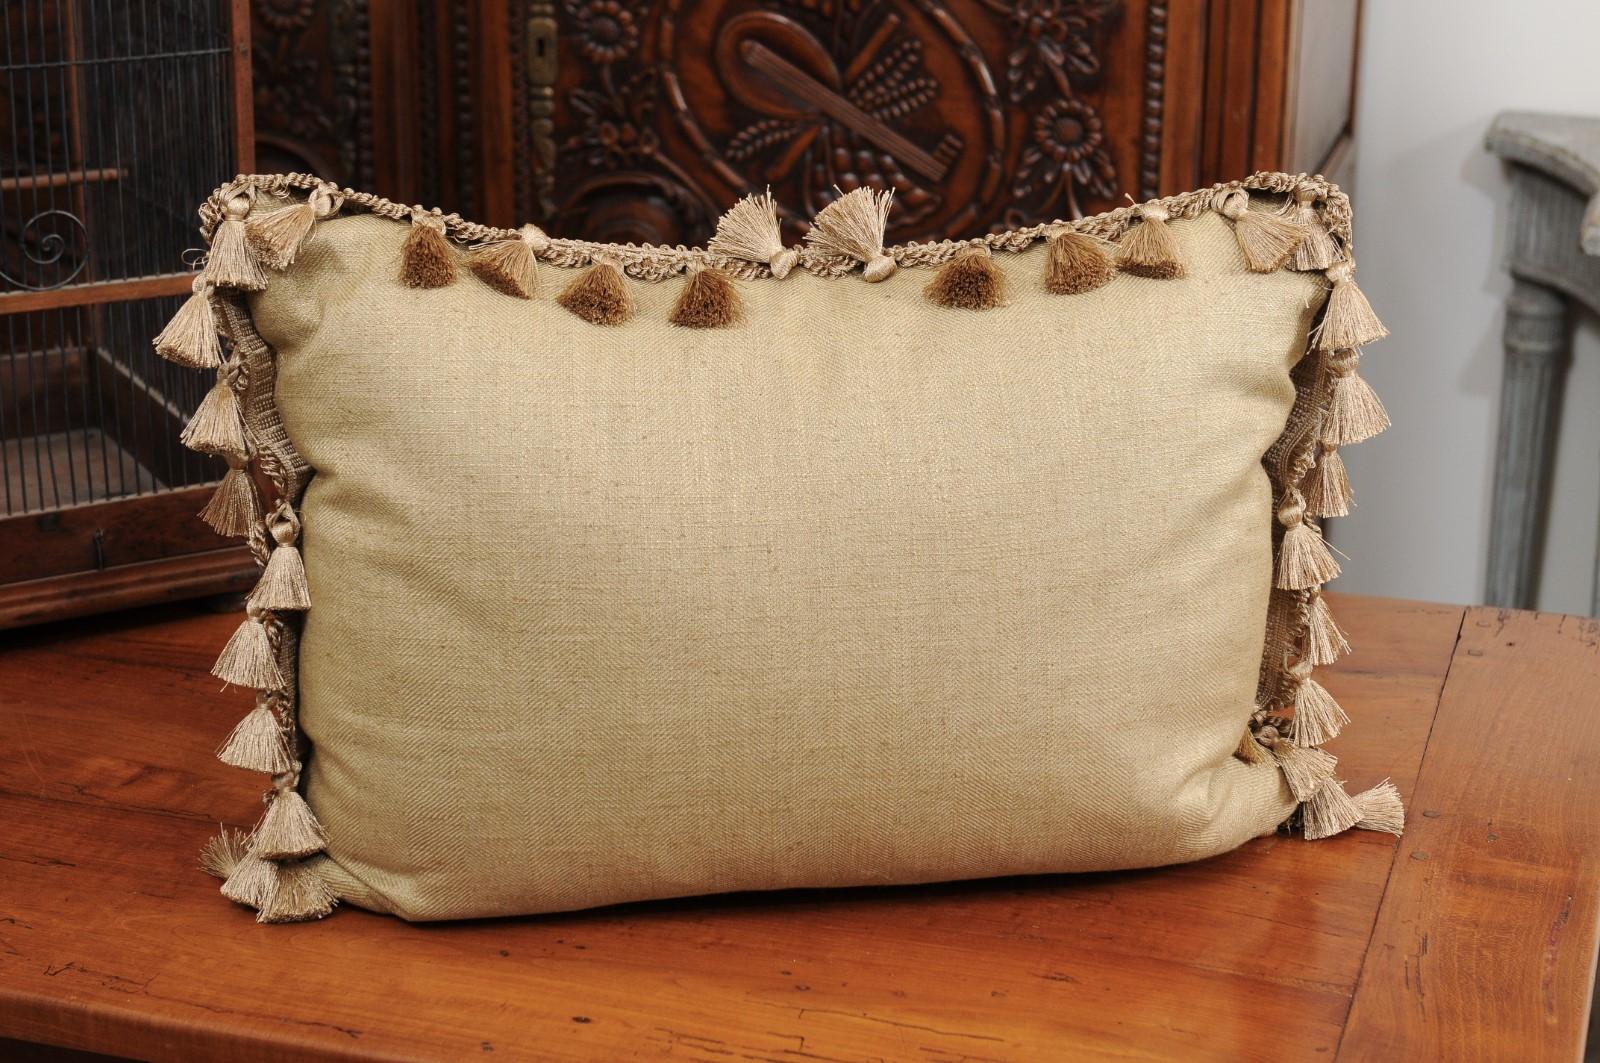 19th Century French Floral Themed Aubusson Tapestry Pillow with Tassels 3